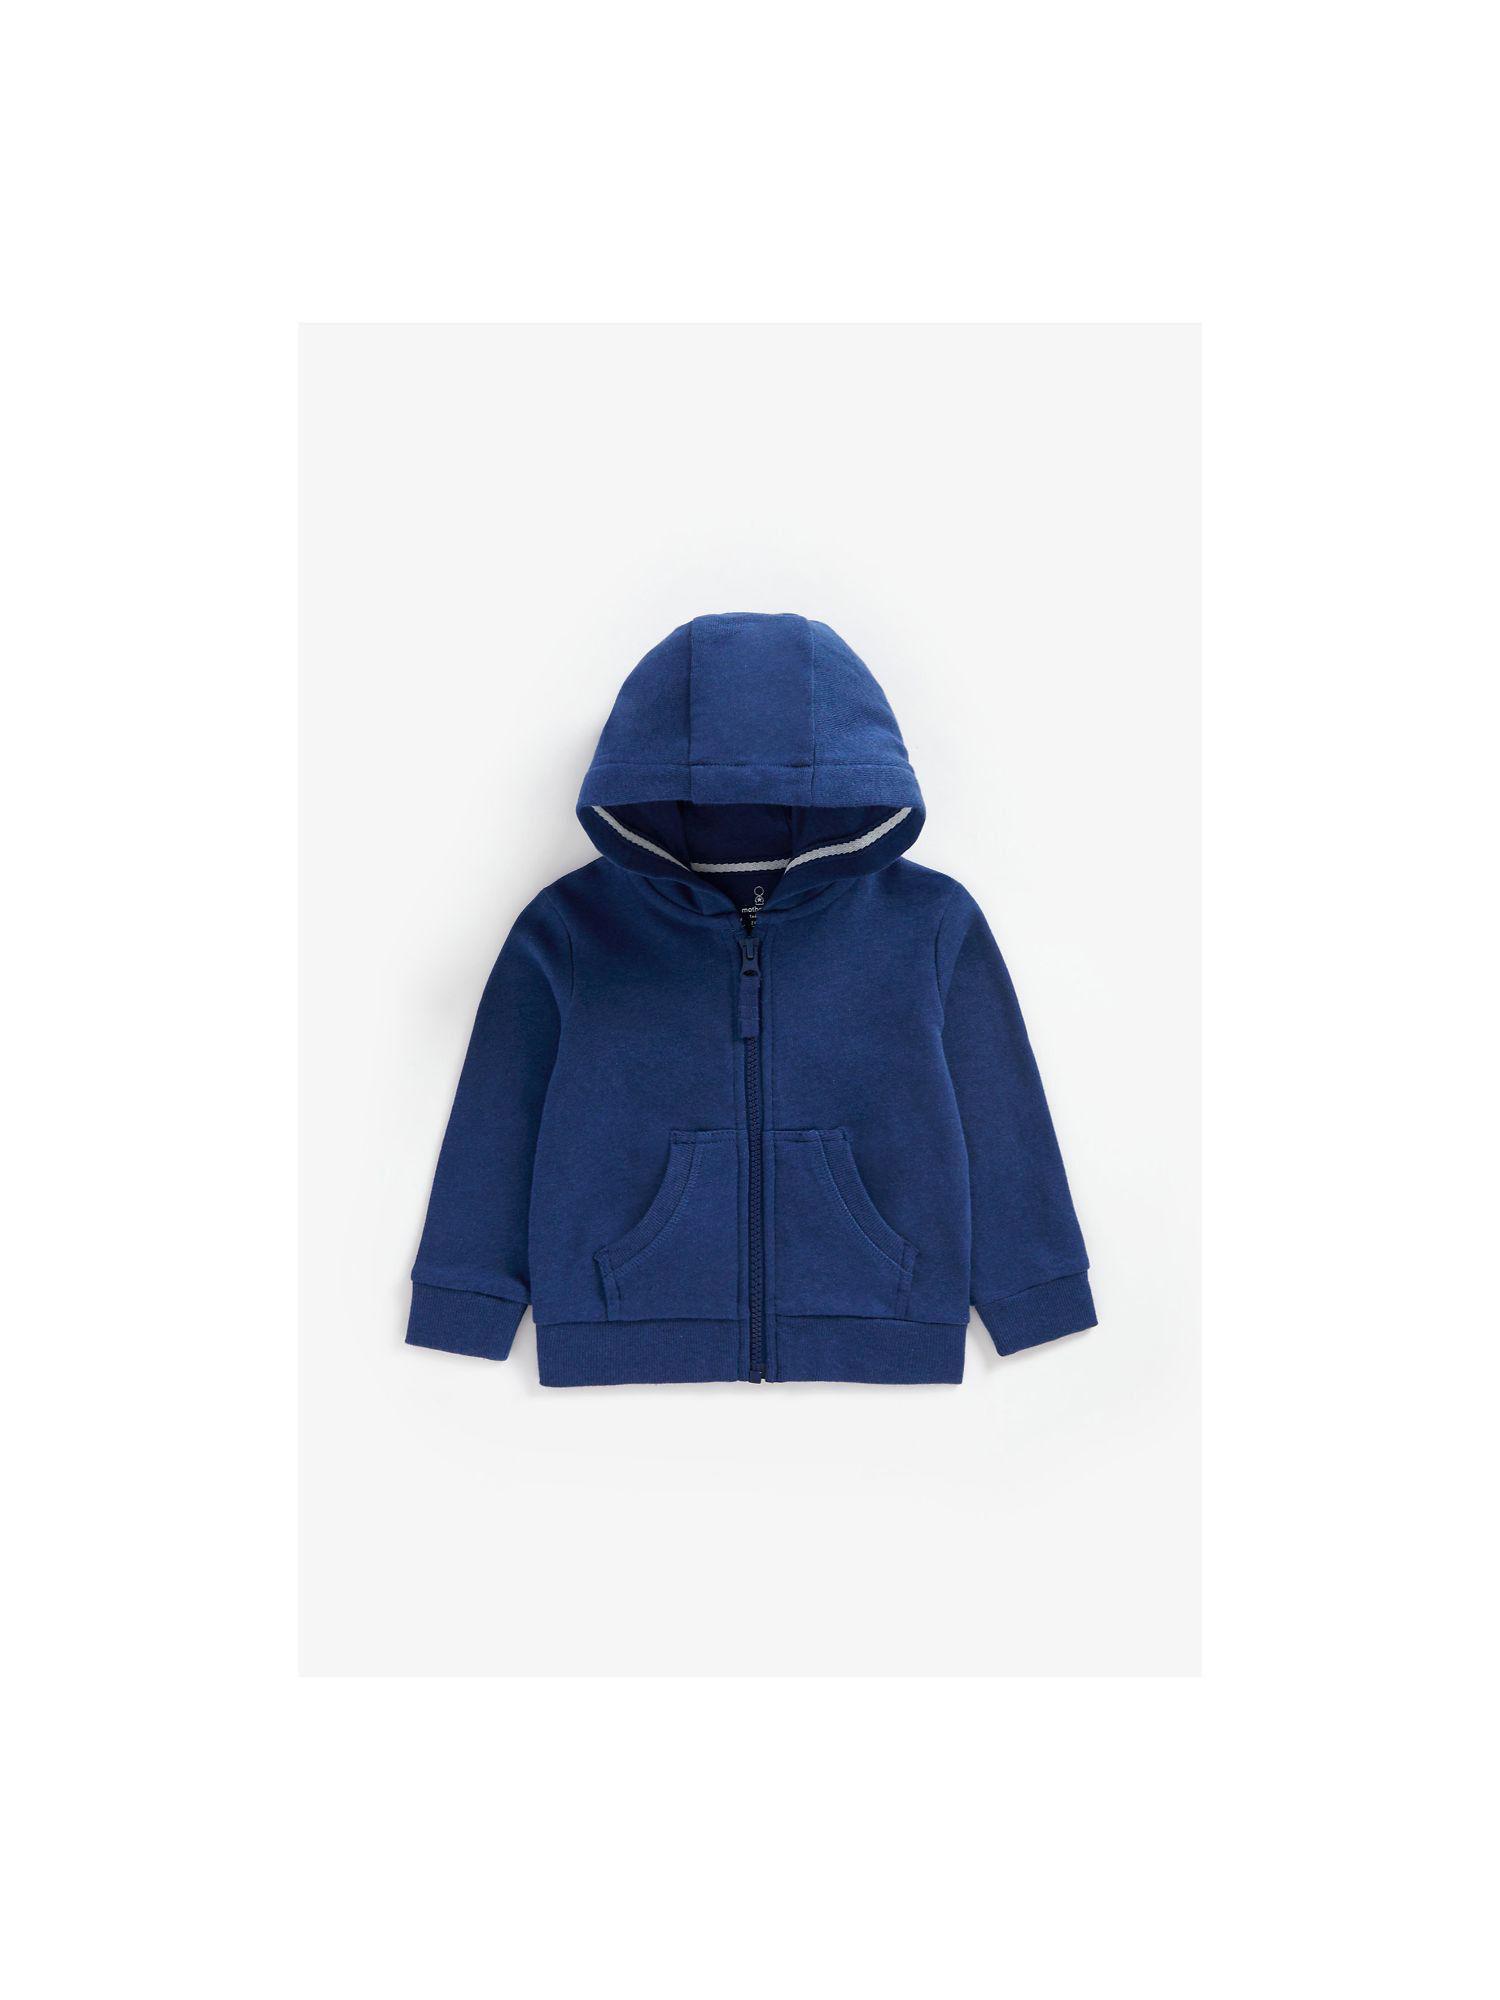 mother care navy essential hoody lb